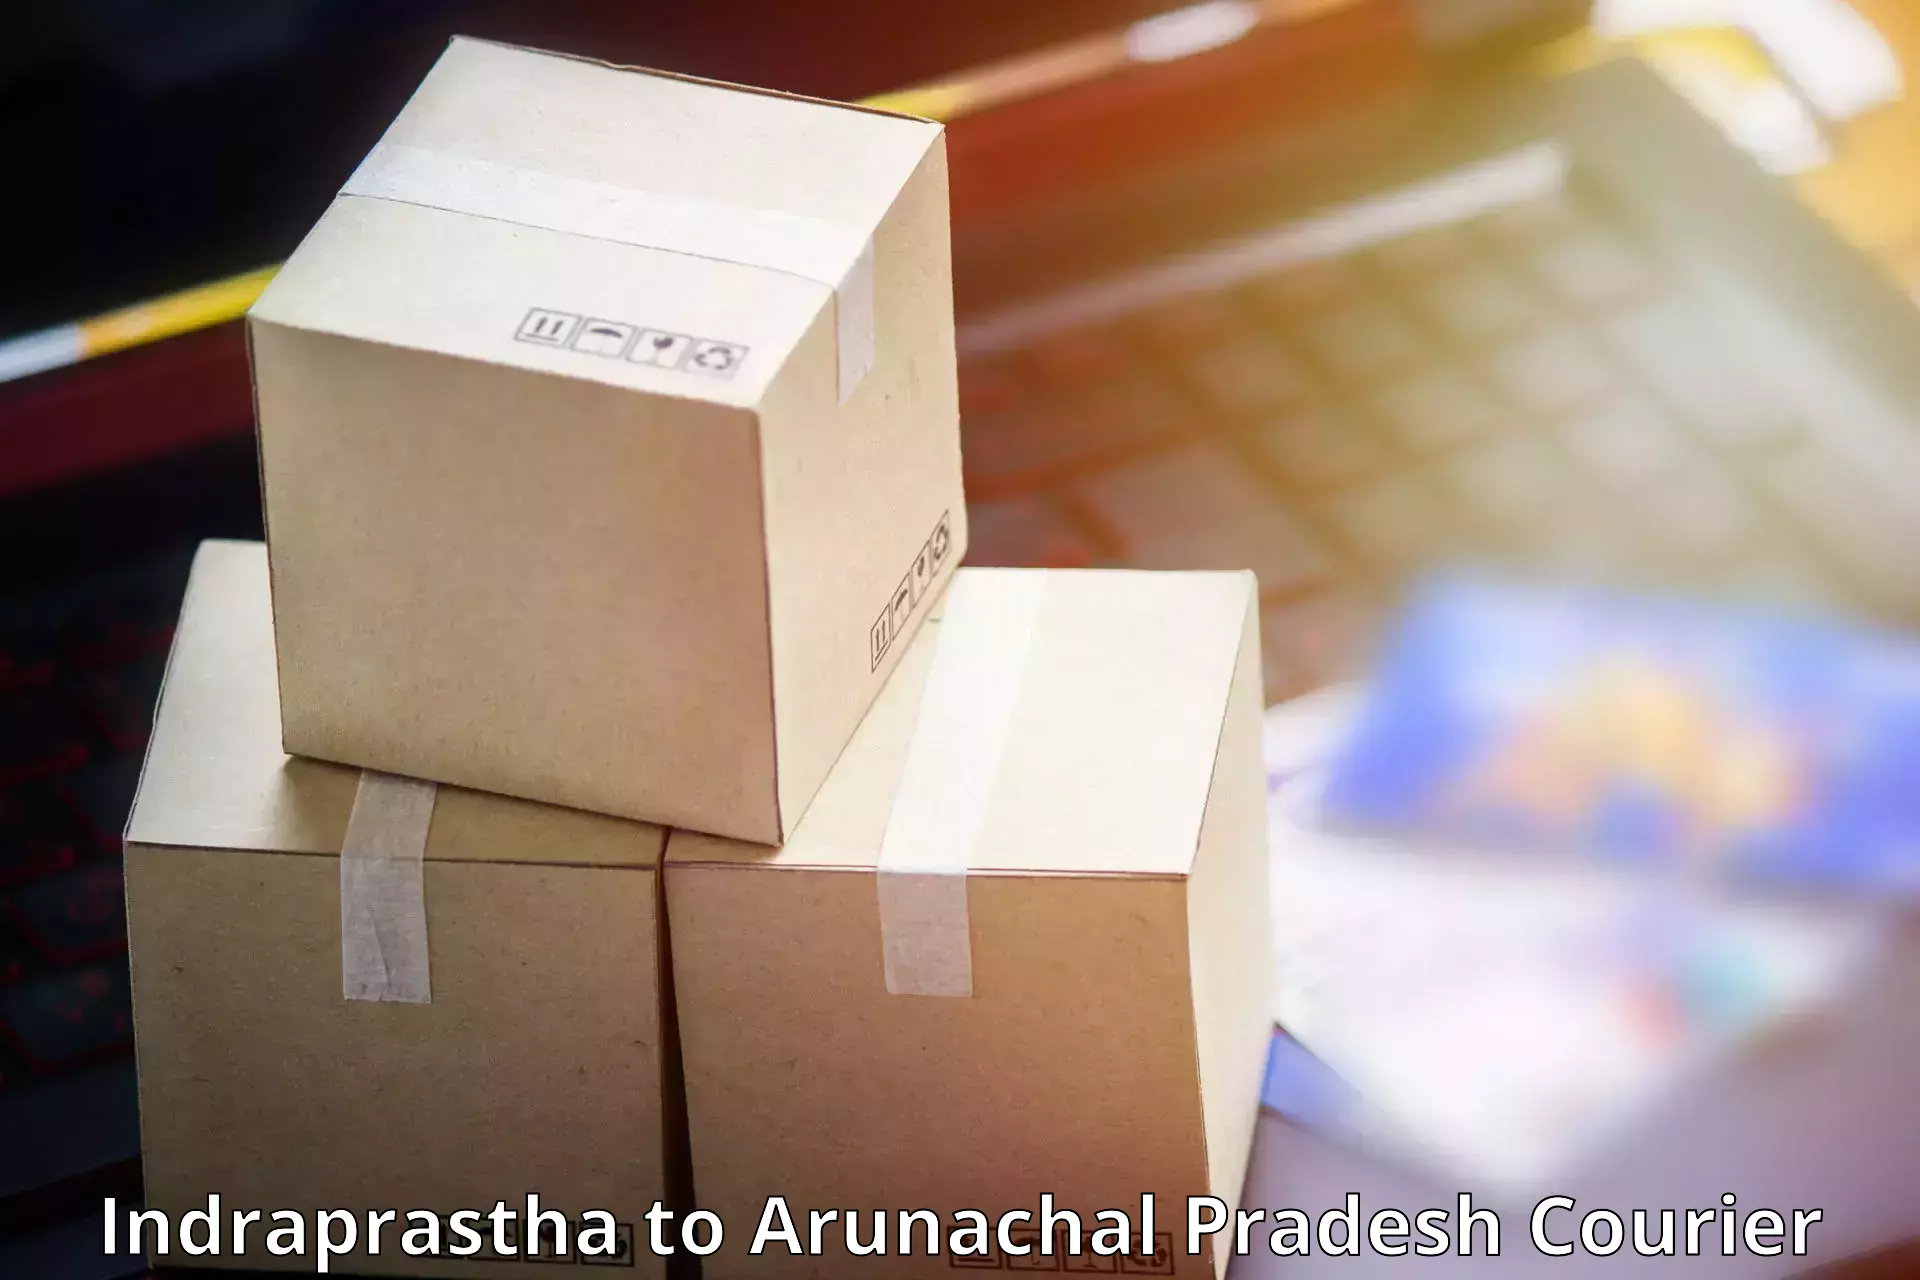 State-of-the-art courier technology Indraprastha to Kharsang